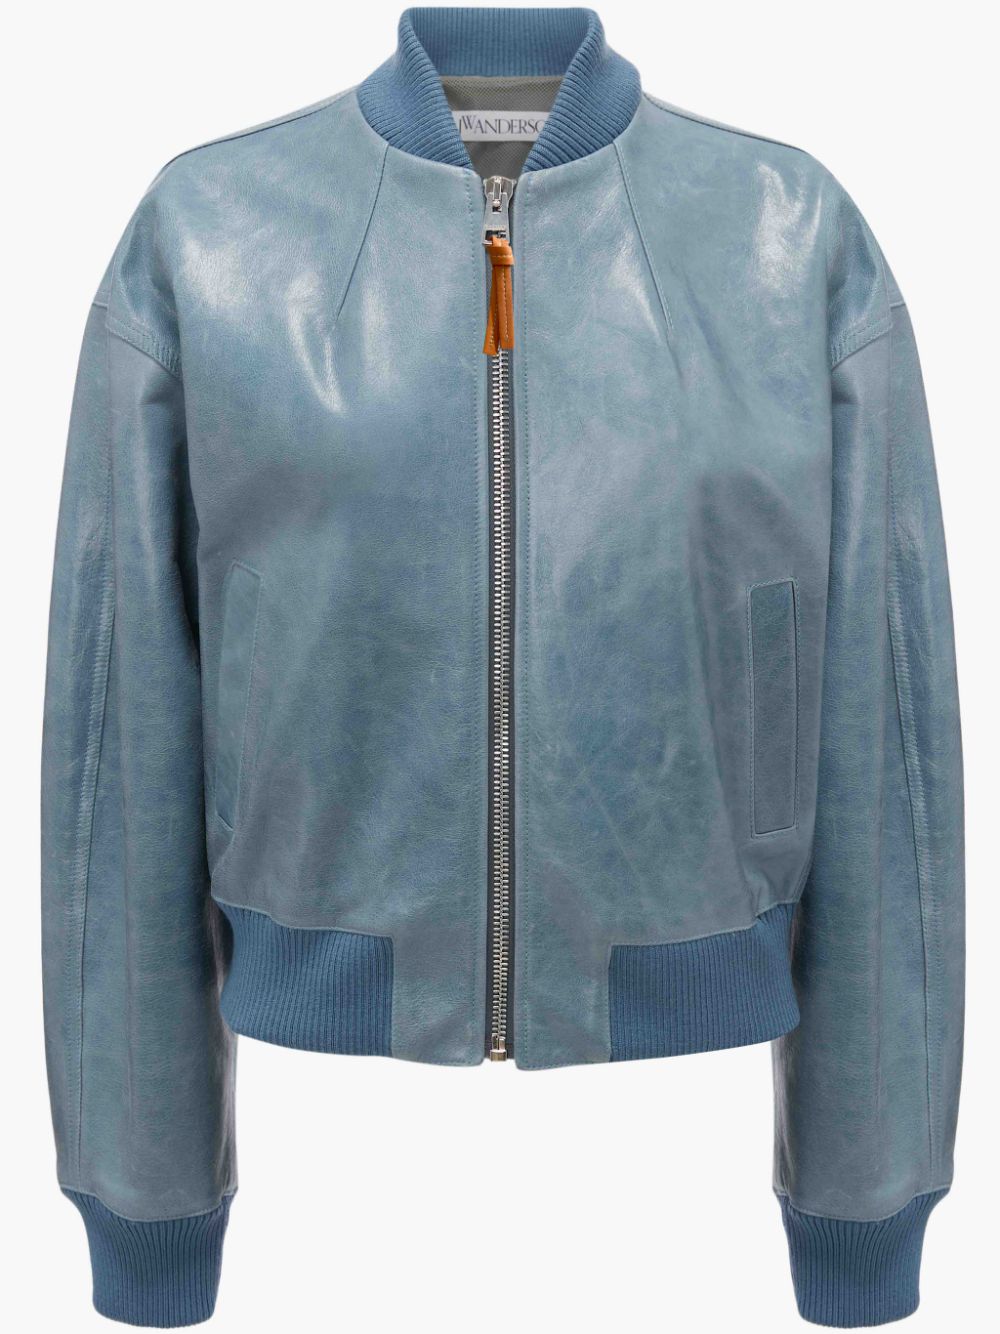 JW ANDERSON LEATHER BOMBER JACKET